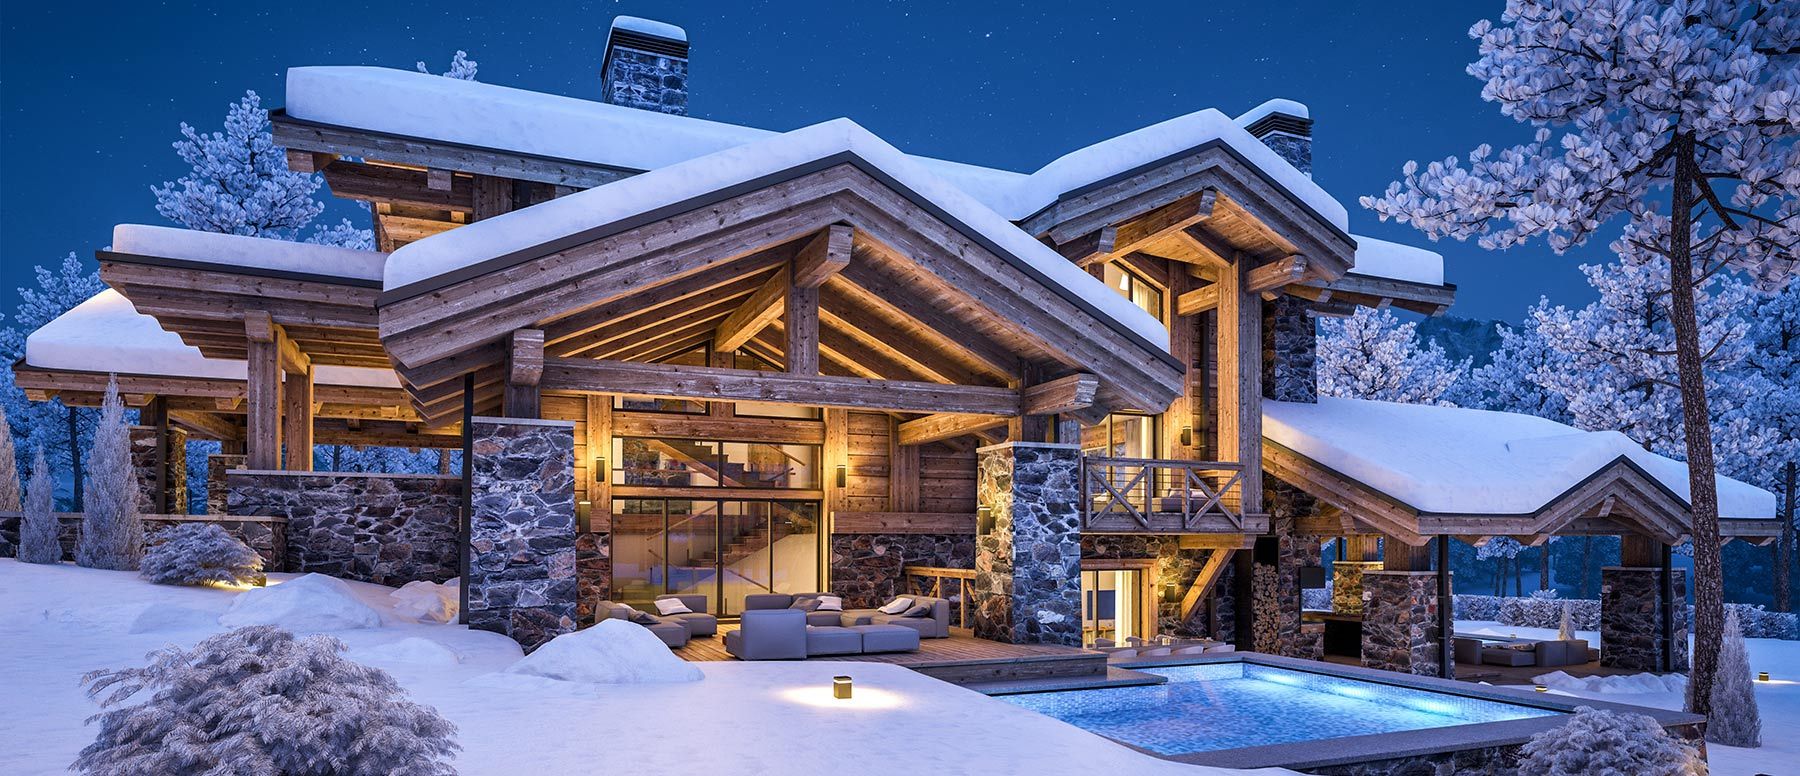 Luxury chalet in the mountains: rent or buy?